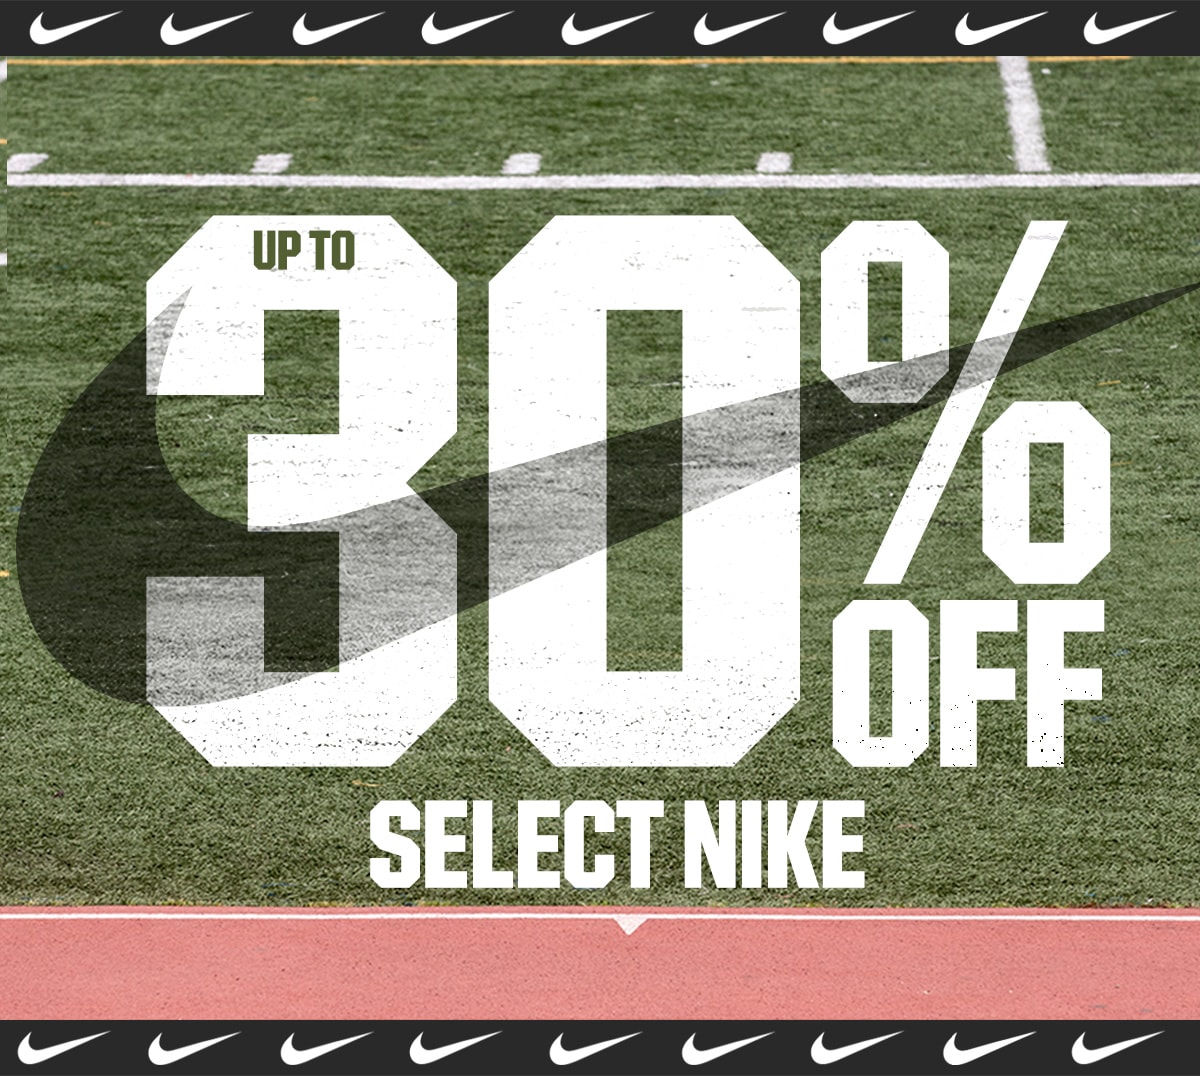 reputación mezclador Sicilia Up to 30% off select Nike is YOURS 👏 - Dick's Sporting Goods